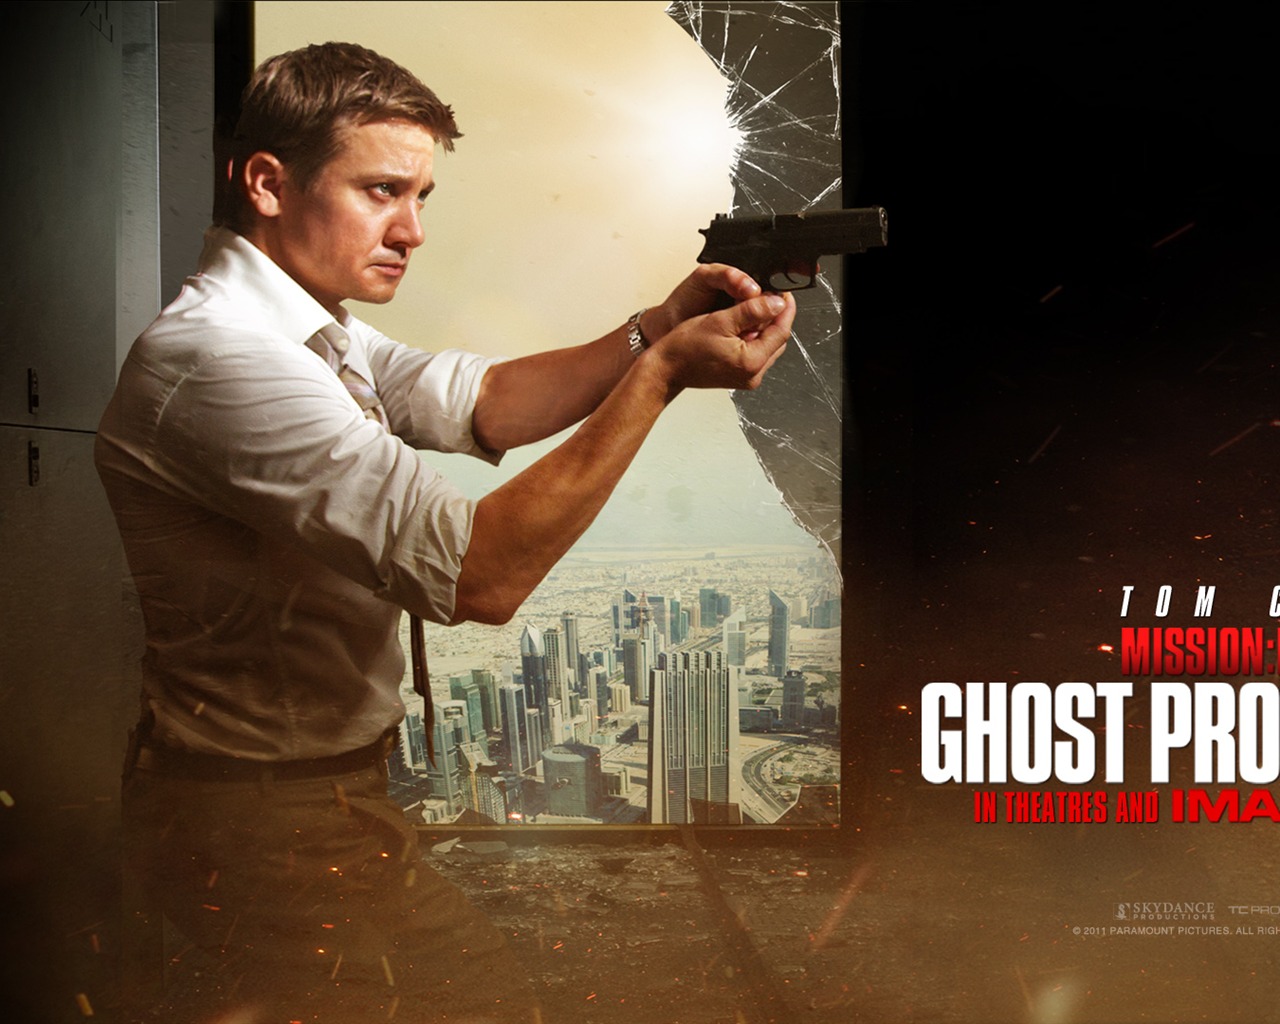 Mission: Impossible - Ghost Protocol HD wallpapers #2 - 1280x1024